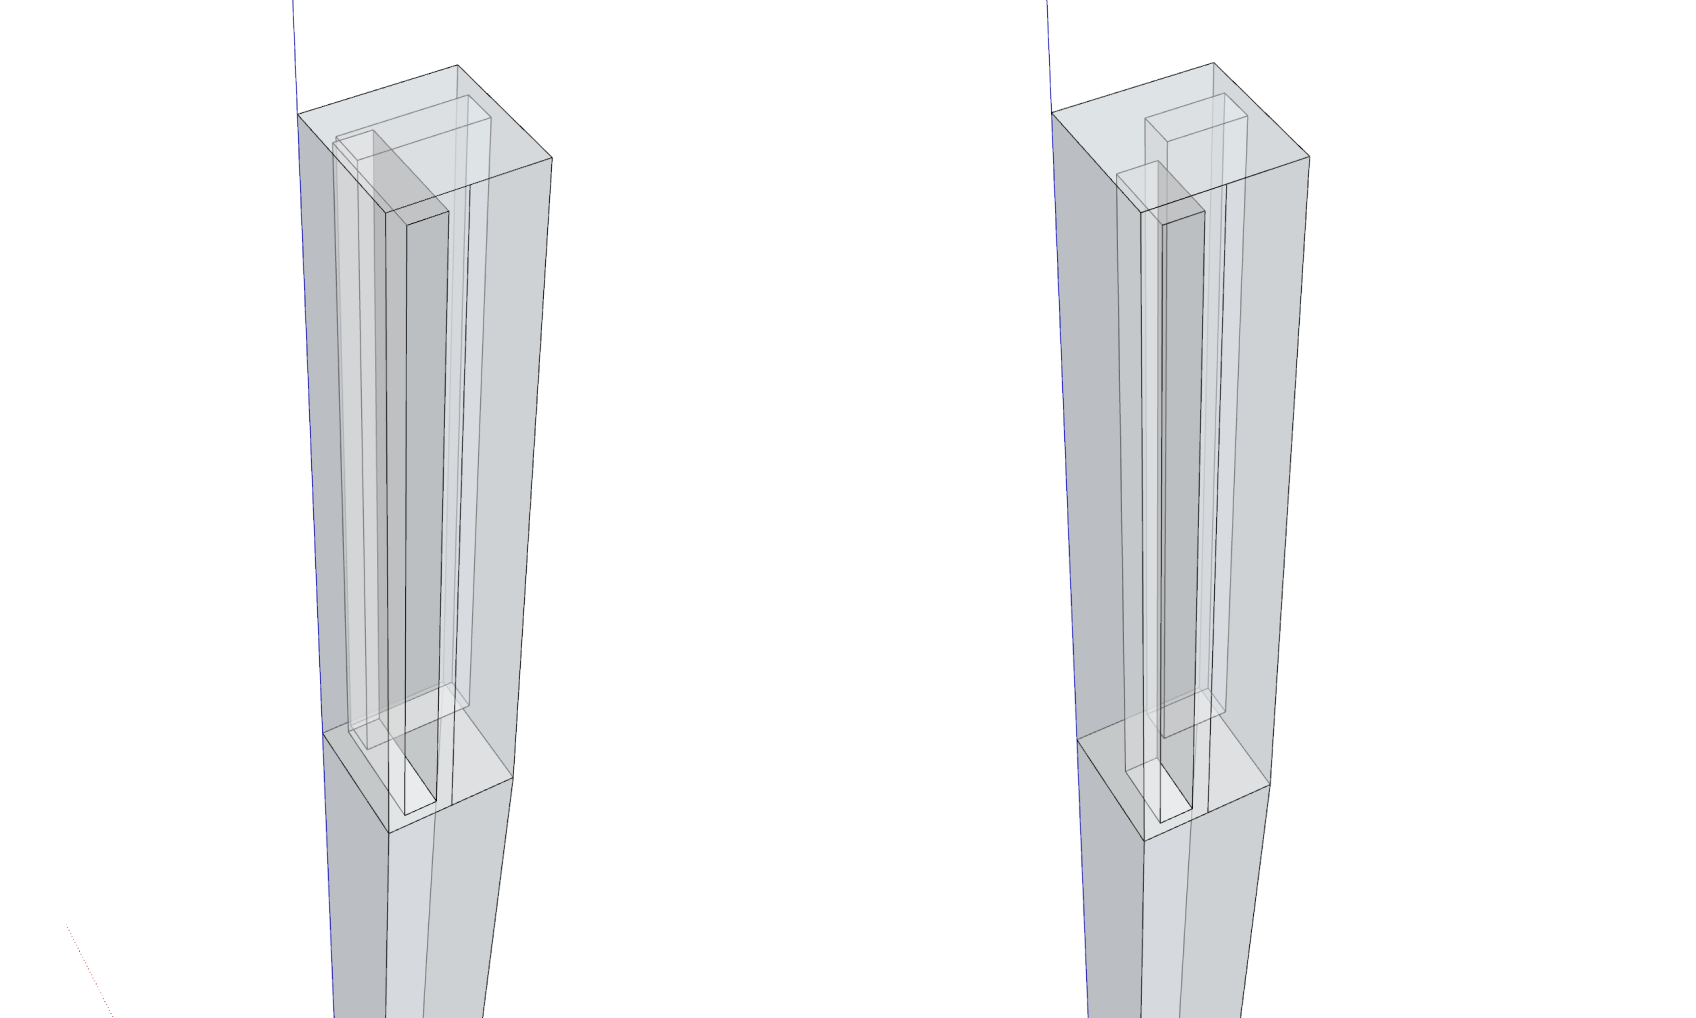 Example of X-Ray View in Sketchup